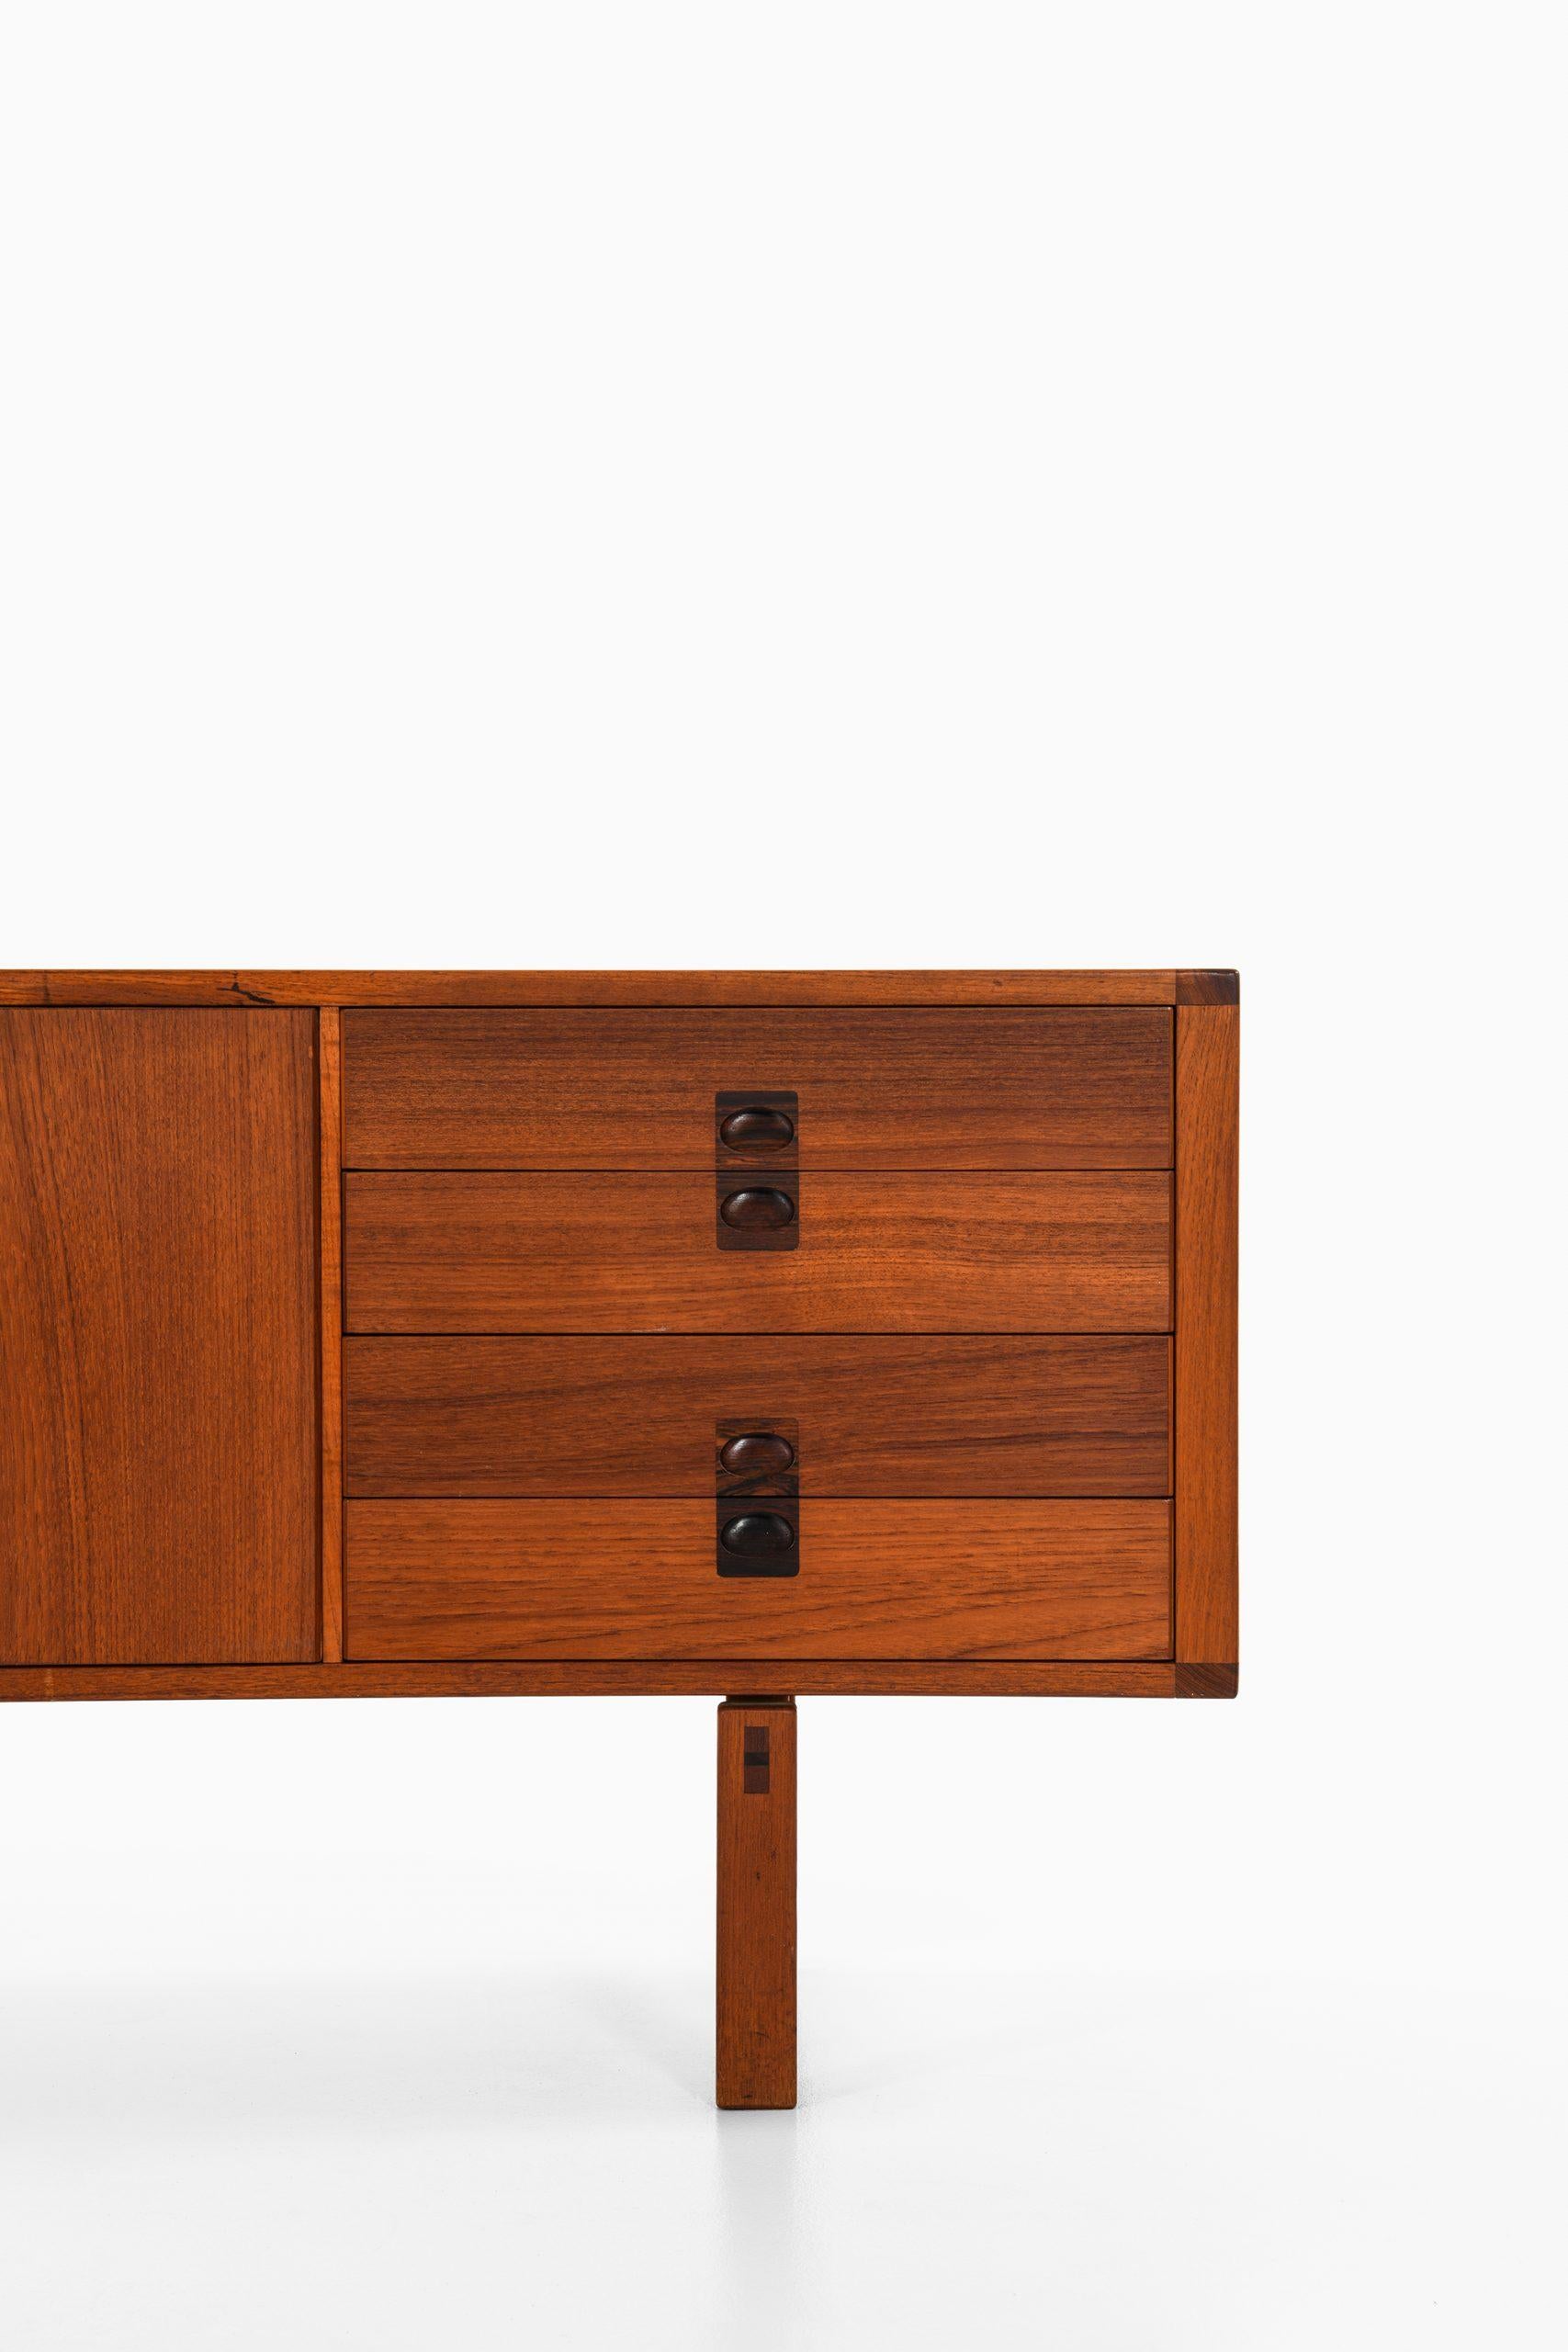 Rare sideboard model Corona designed by Lennart Bender. Produced by Ulferts in Sweden.